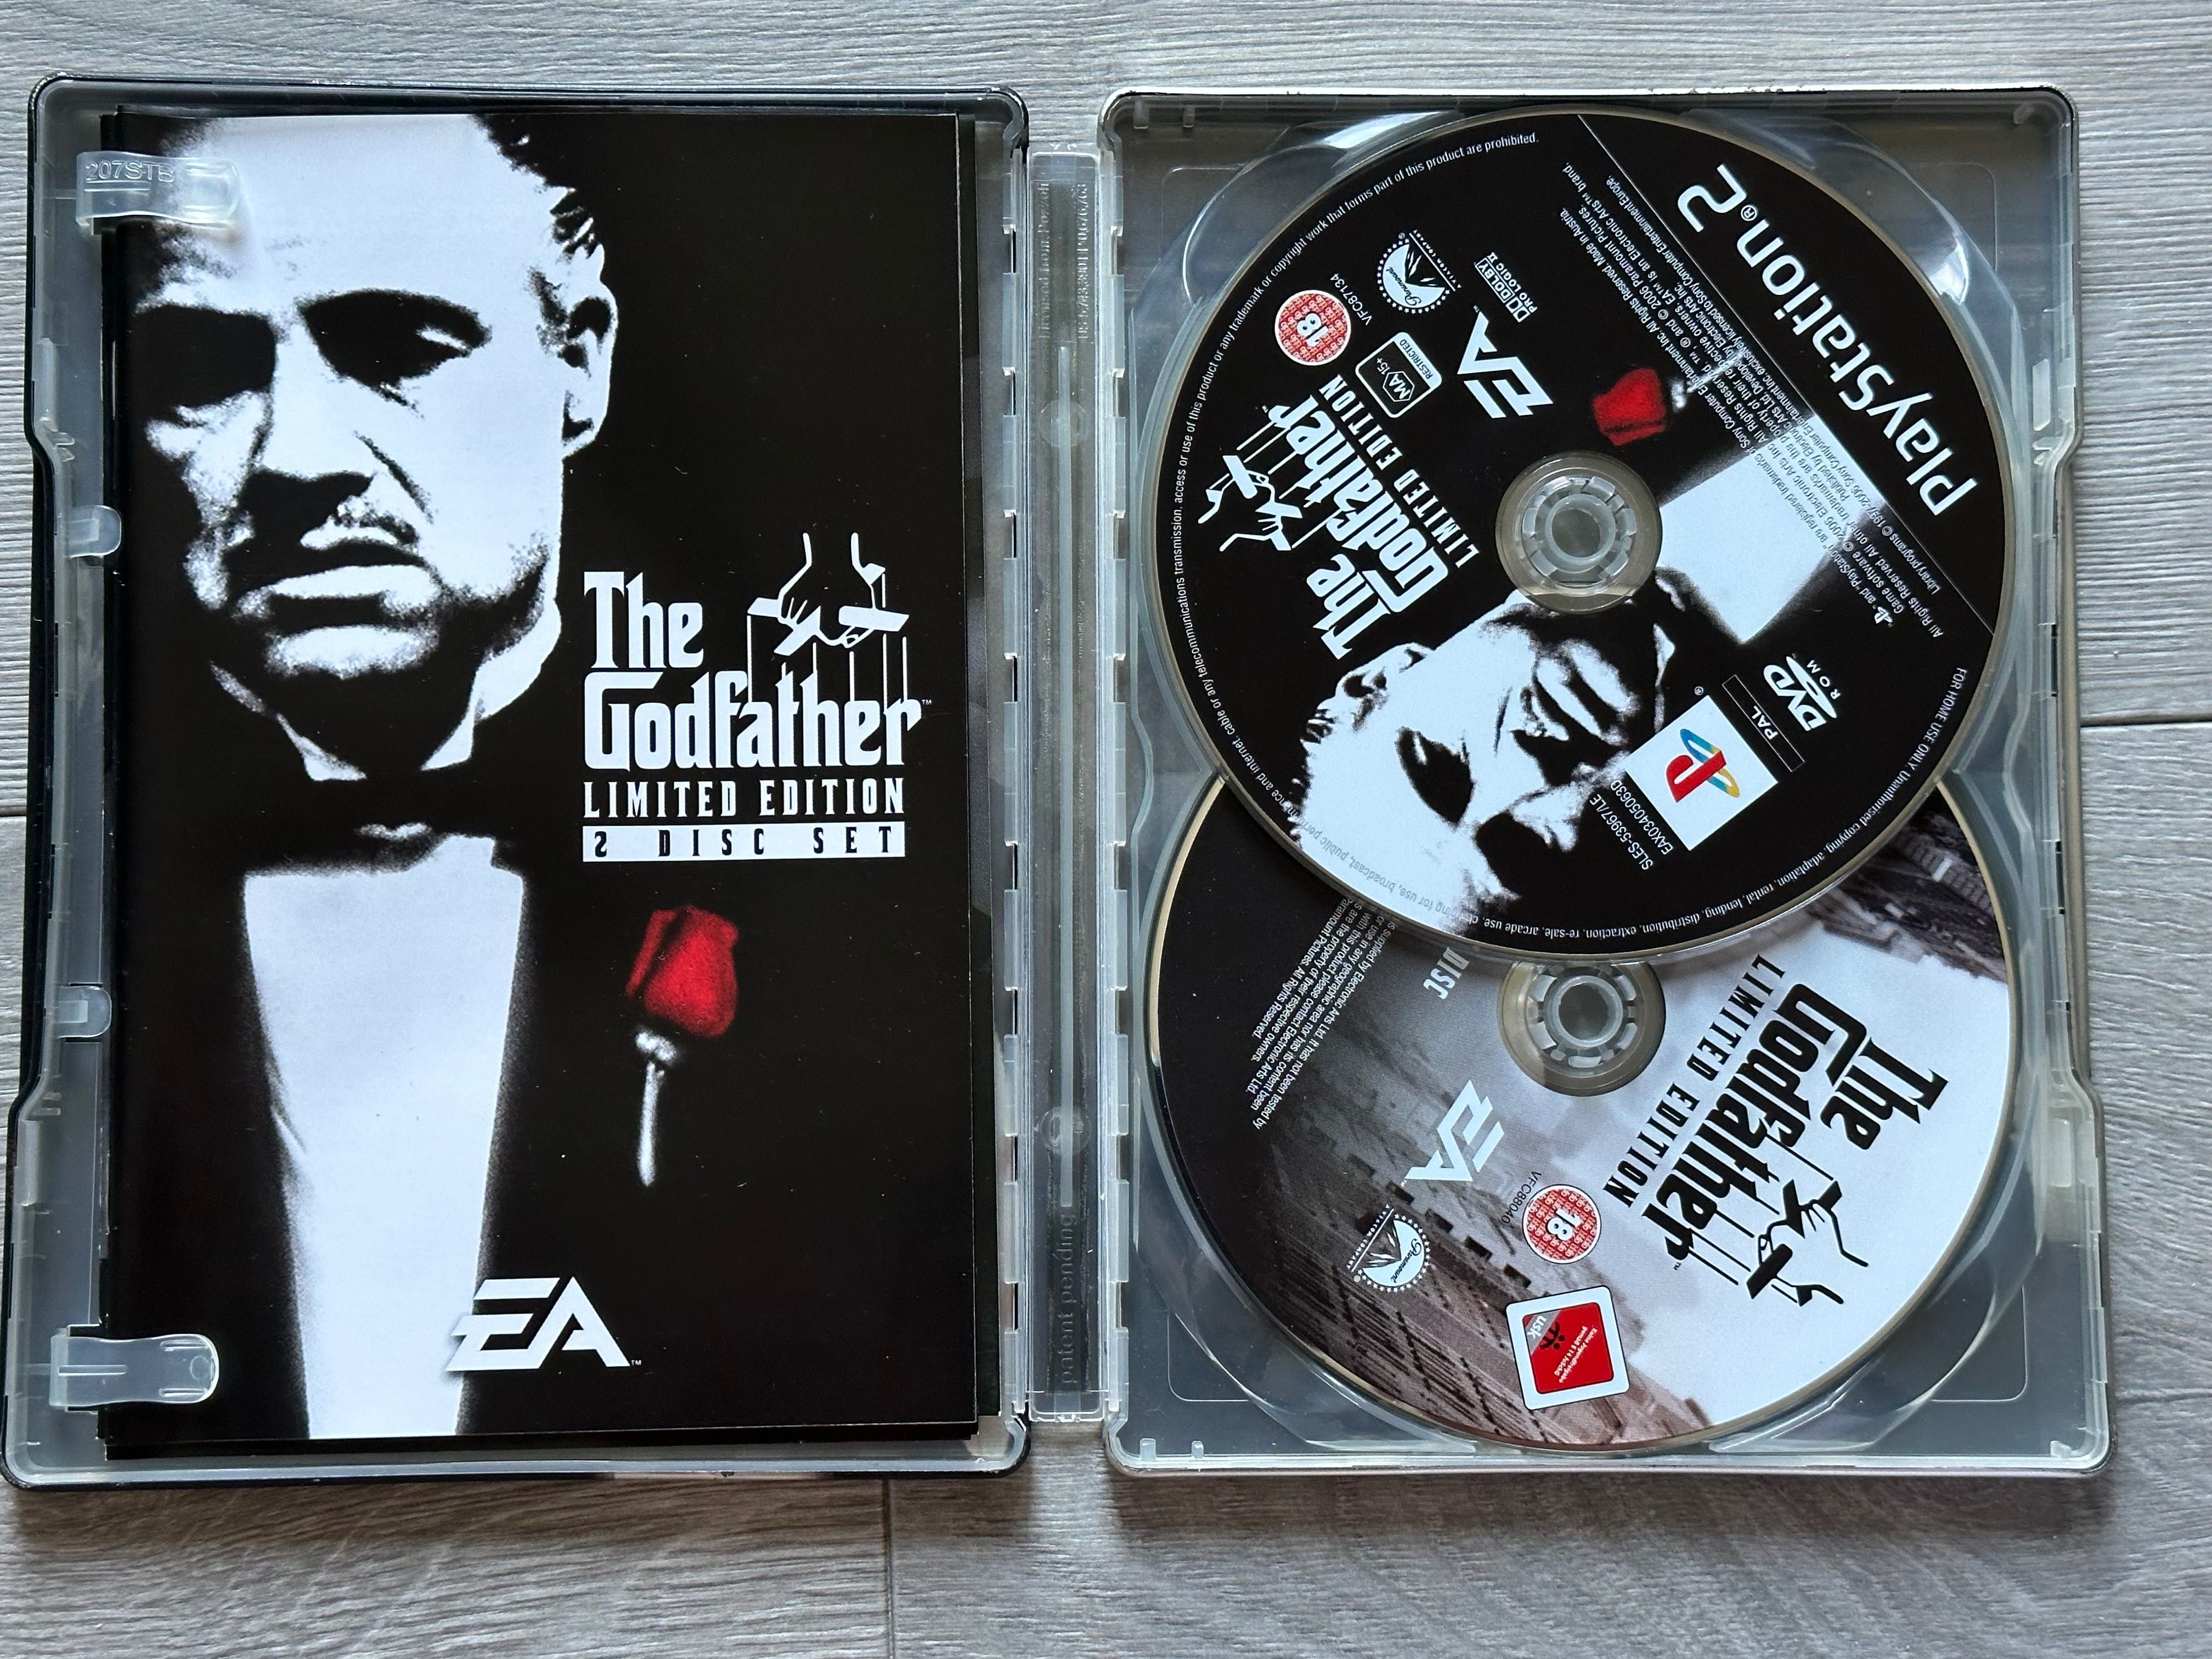 The Godfather (Limited Edition) / Playstation 2